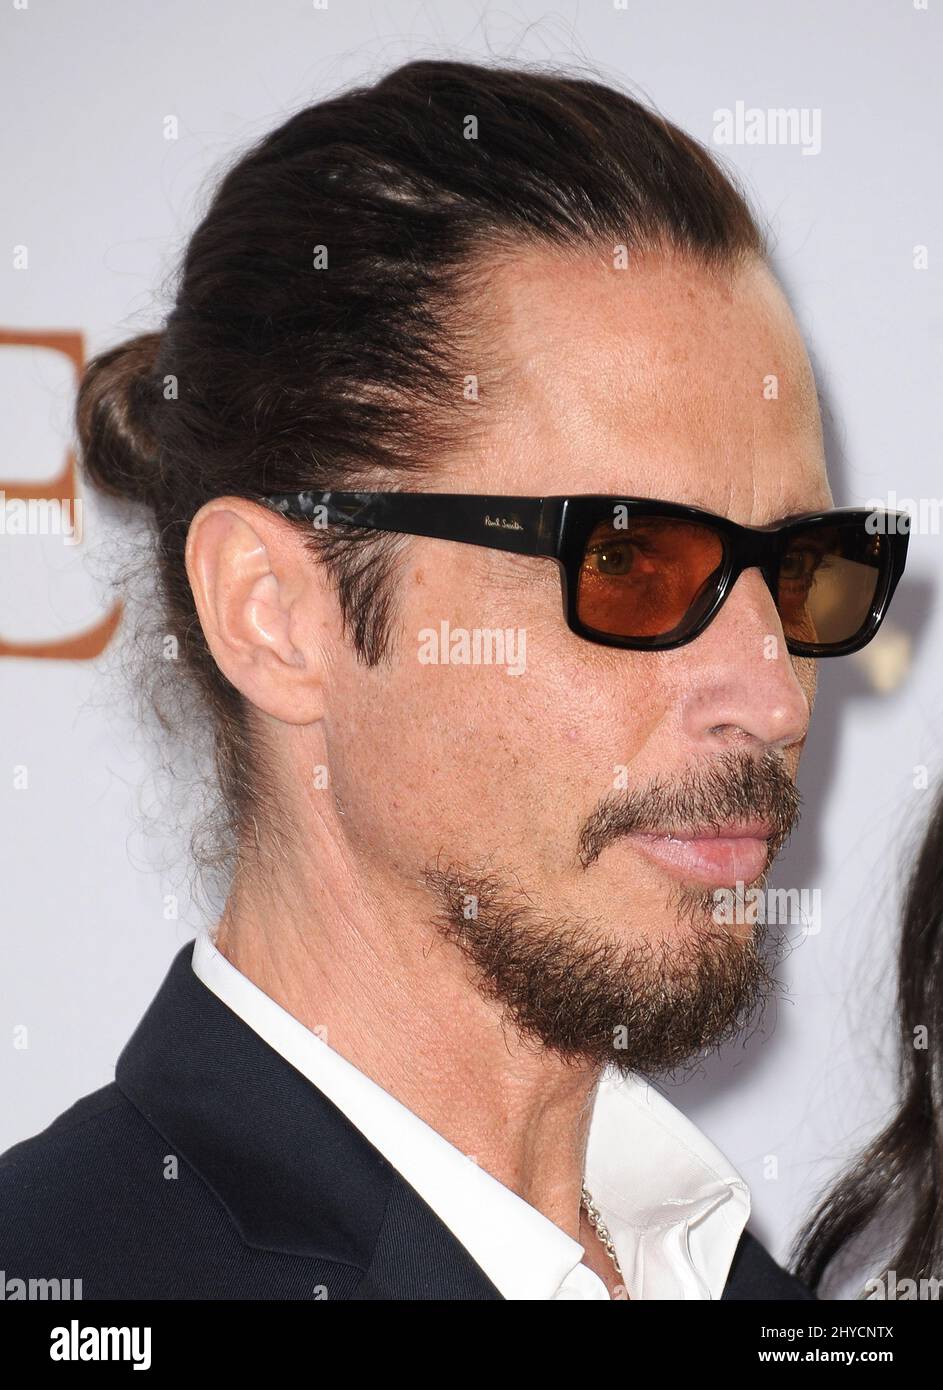 Chris Cornell has died aged 52. Chris Cornell attending the premiere of The Promise, held at TCL Chinese Theatre, in Los Angeles, California Stock Photo